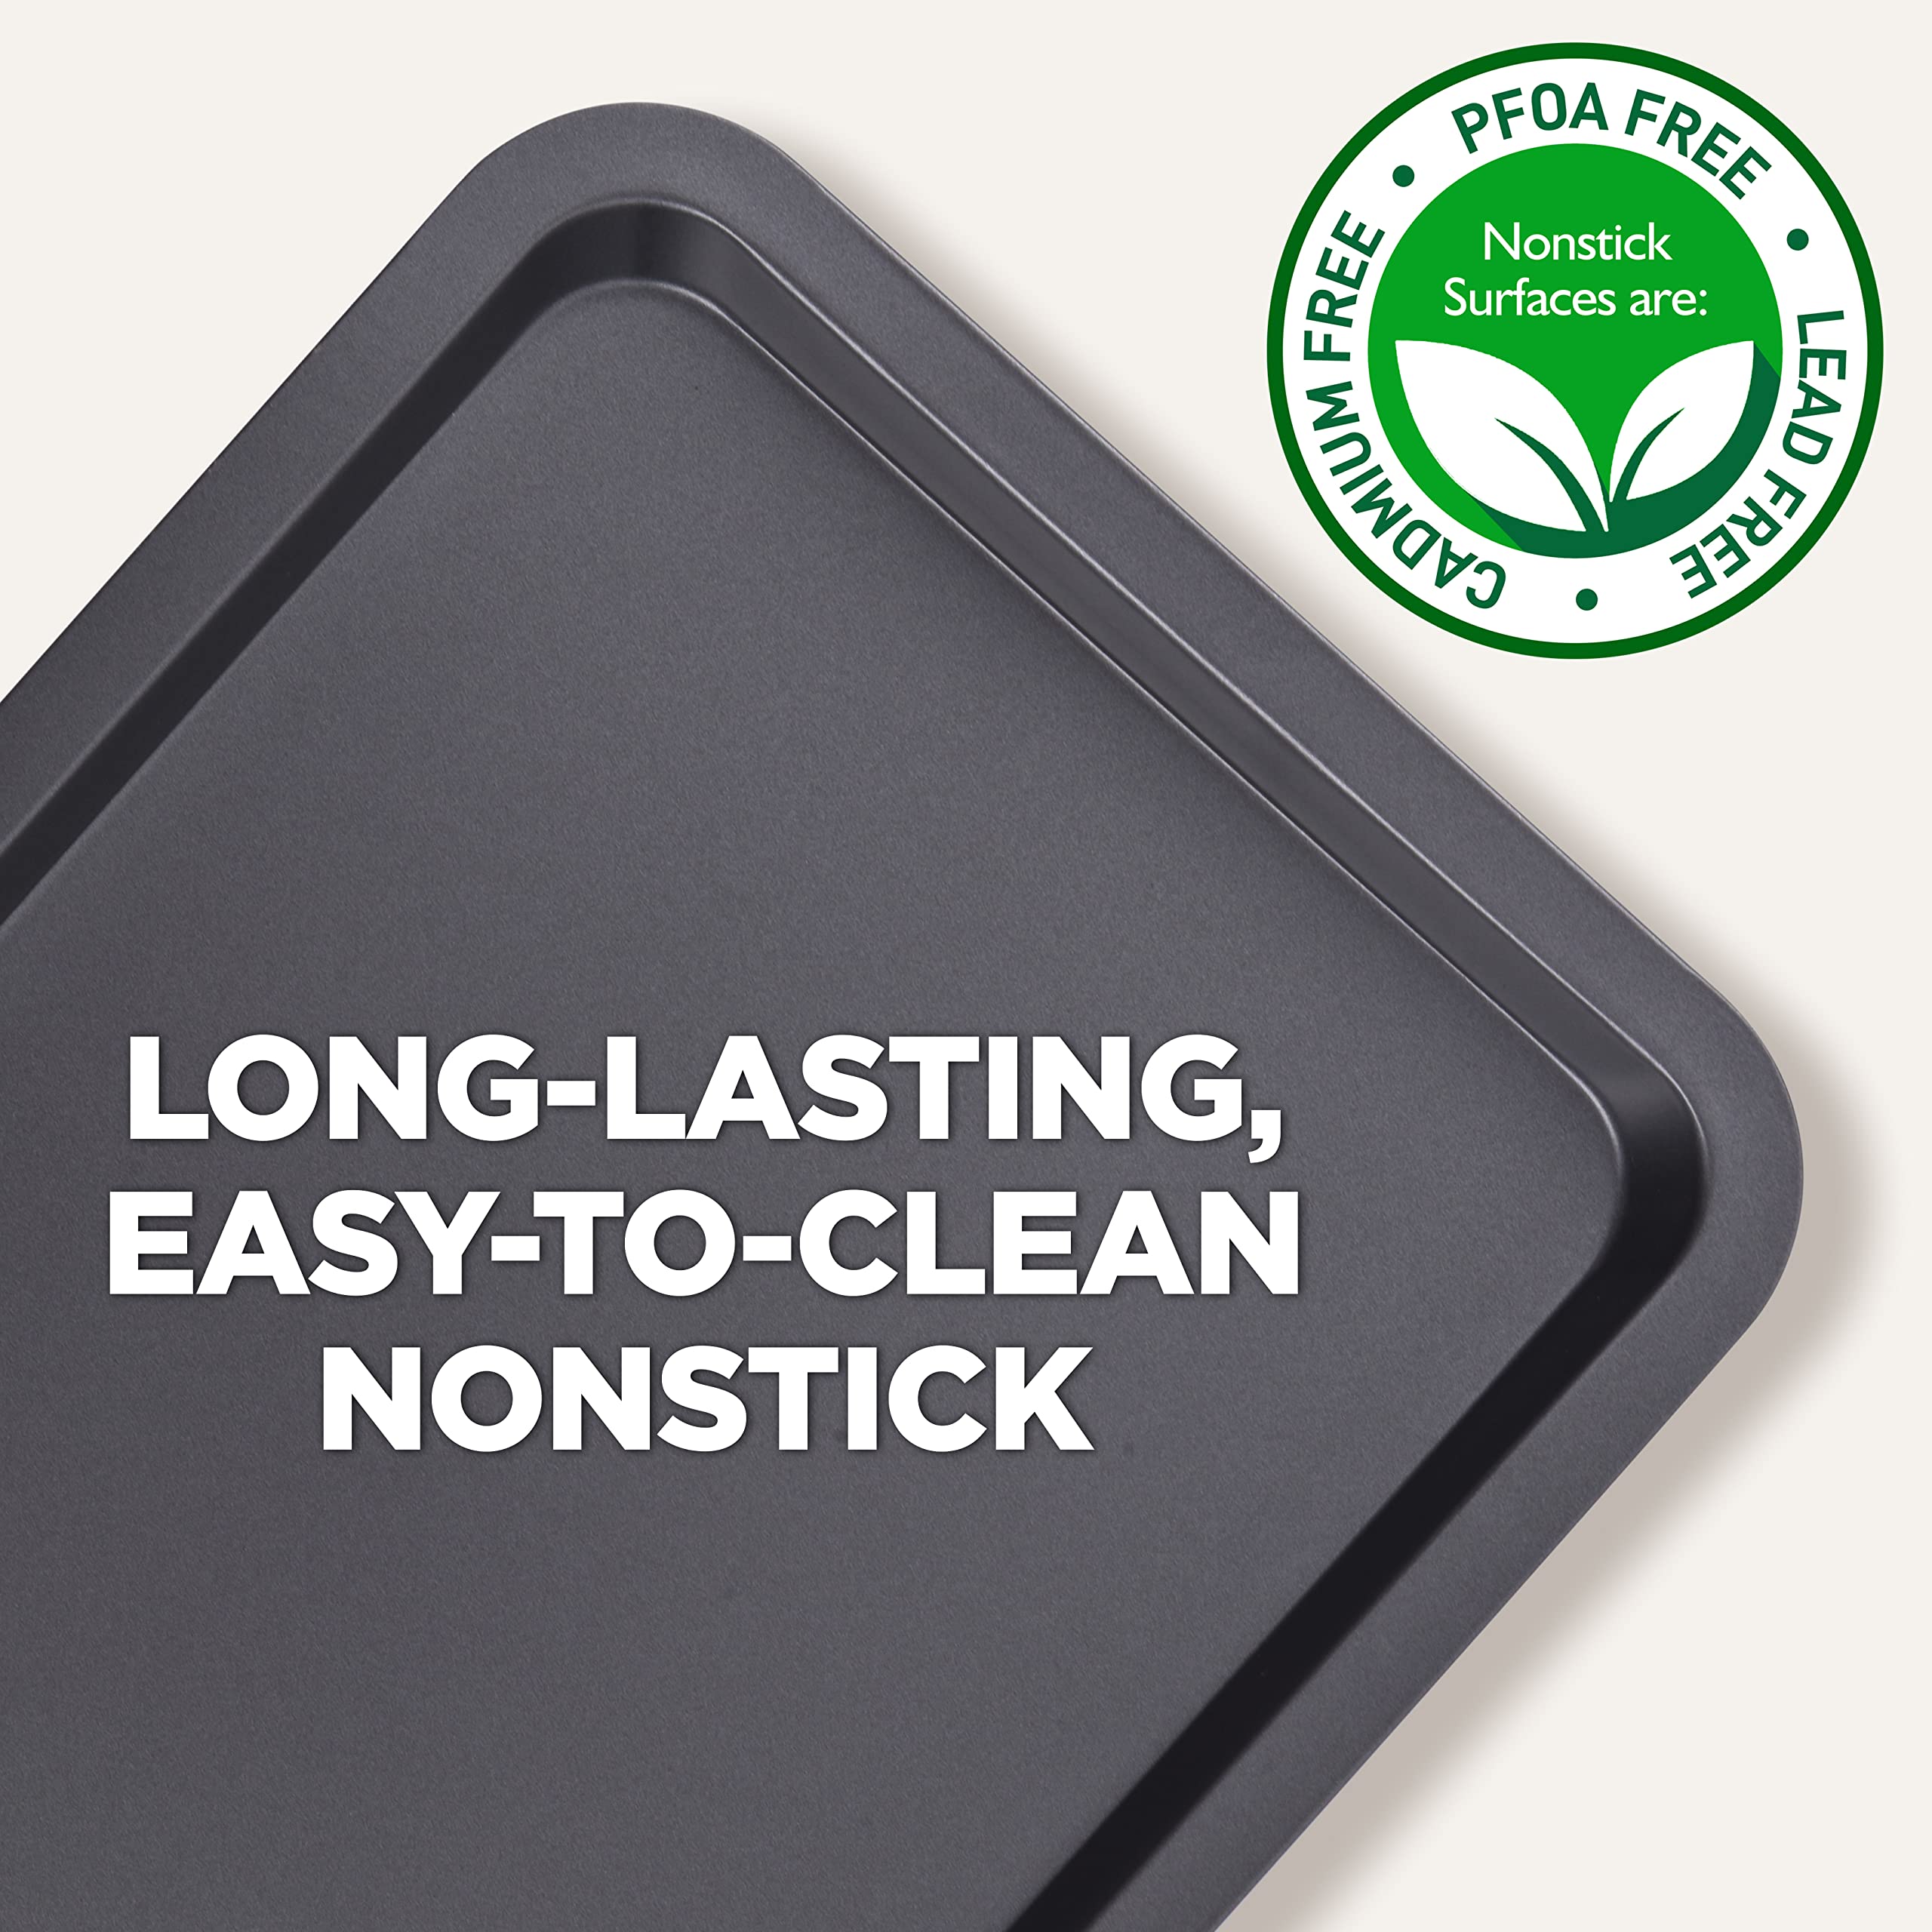 NutriChef 3-Pc. Nonstick Cookie Sheet Pans - PFOAm PFOSm PTFE-Free, Professional Quality Kitchen Cooking Non-Stick Baking Trays w/ Black Coating Inside & Outside